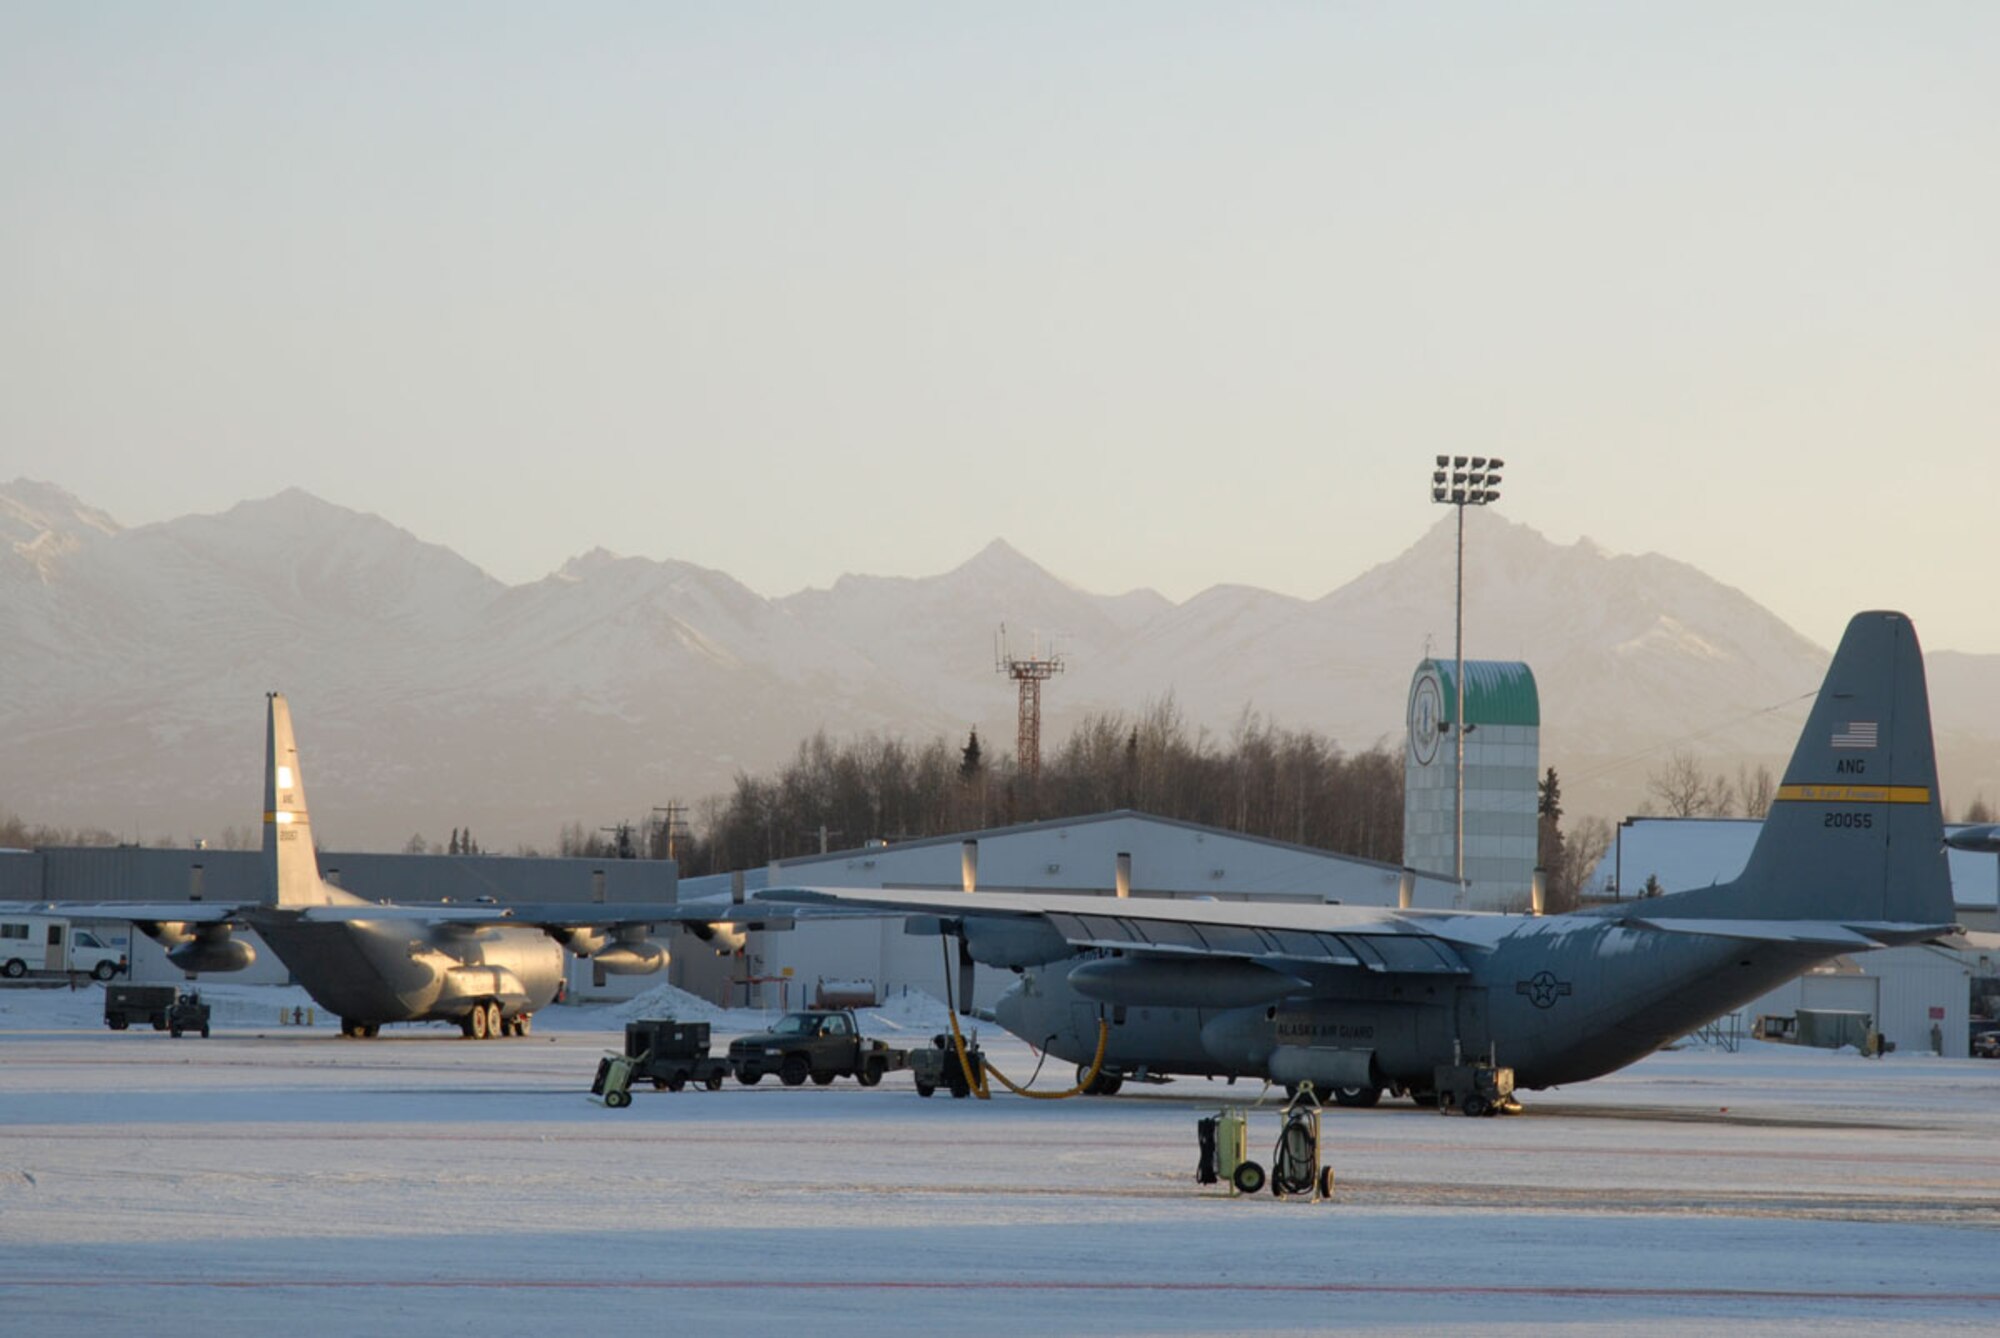 C-130s are maintained on Kulis Air National Guard Base, Wednesday, while Guardsmen prepare for the move to Joint Base Elmendorf-Richardson. All of the aircraft from Kulis will make a final pass on Feb. 12 to signify the shutting down of the Alaska Air National Guard base. (U.S. Air Force photo/Master Sgt. Shannon Oleson)